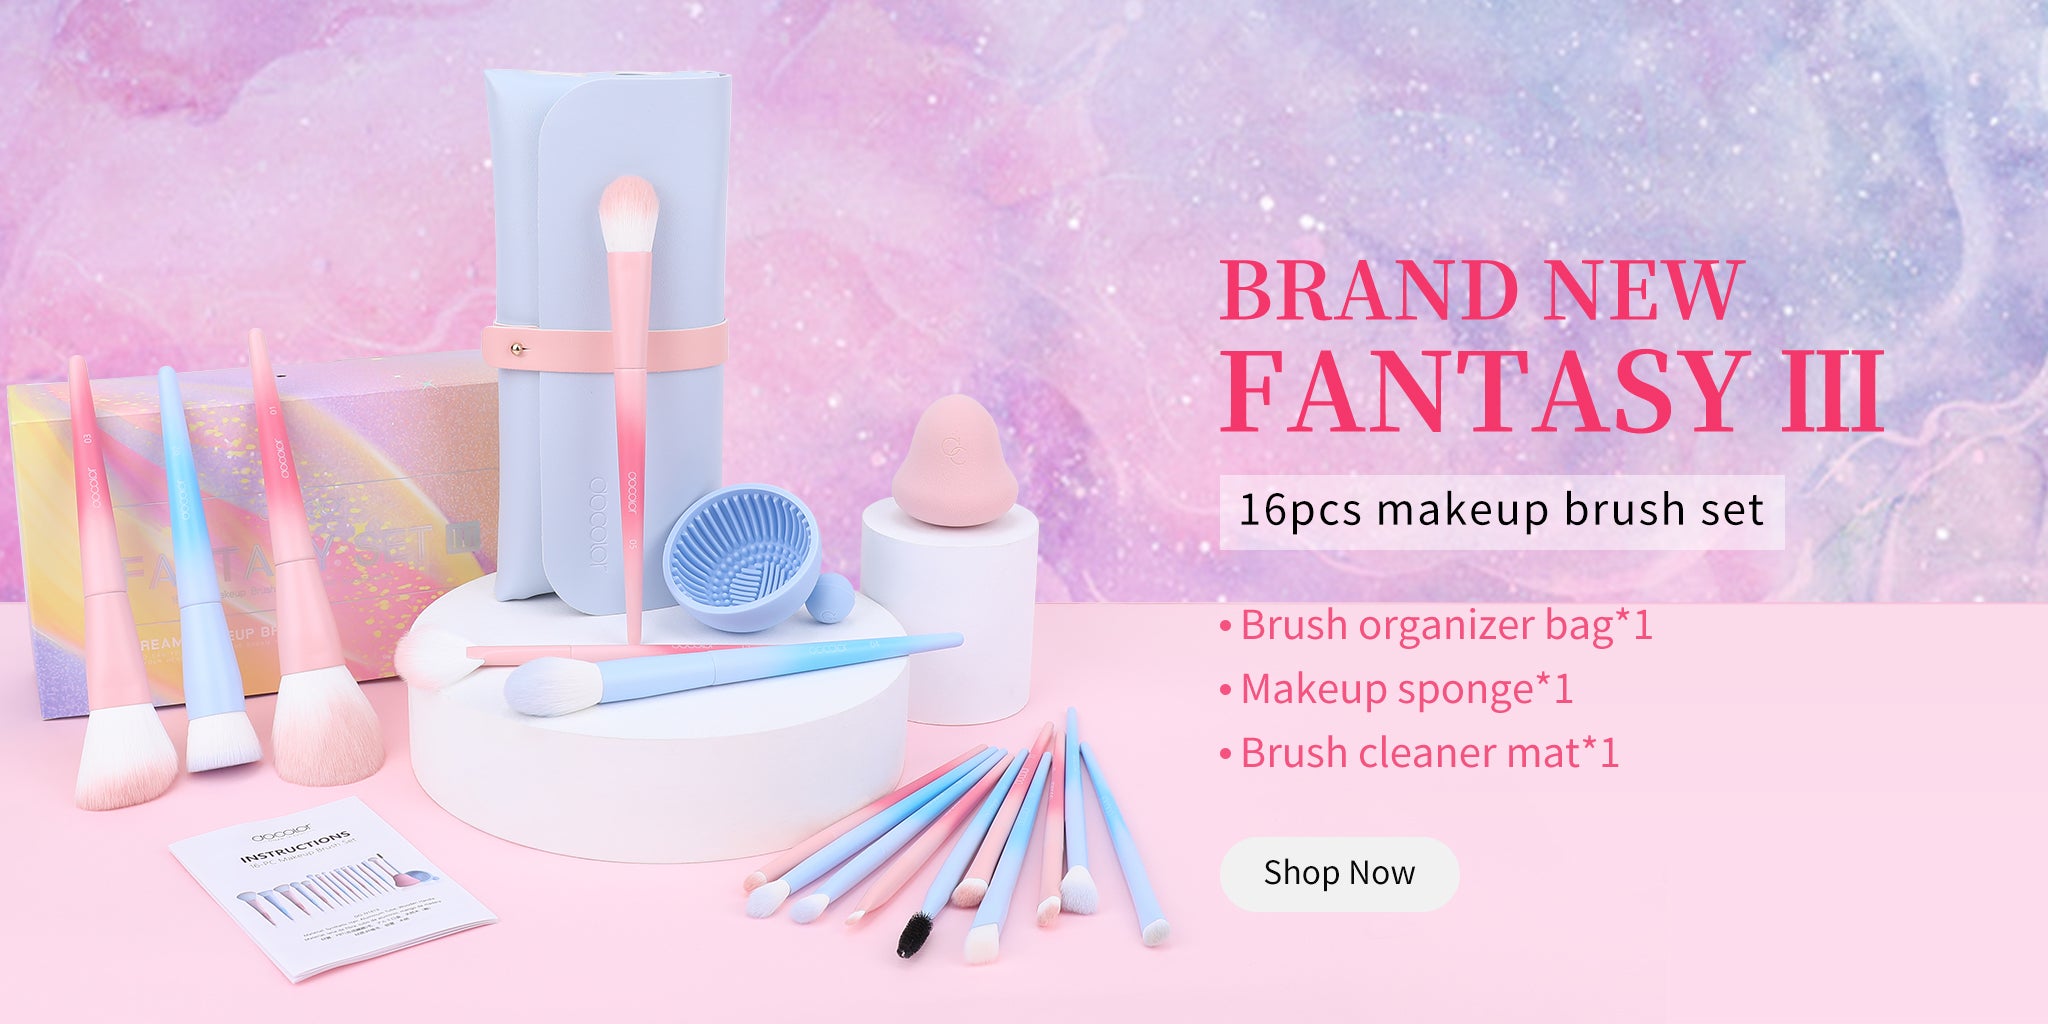 Stepping into a fairyland of fantasy, the Fantasy III 16pcs makeup brush set will take you on a unique makeup journey. Unique makeup brush set, magical magic wands, create your own beautiful fairy tales!